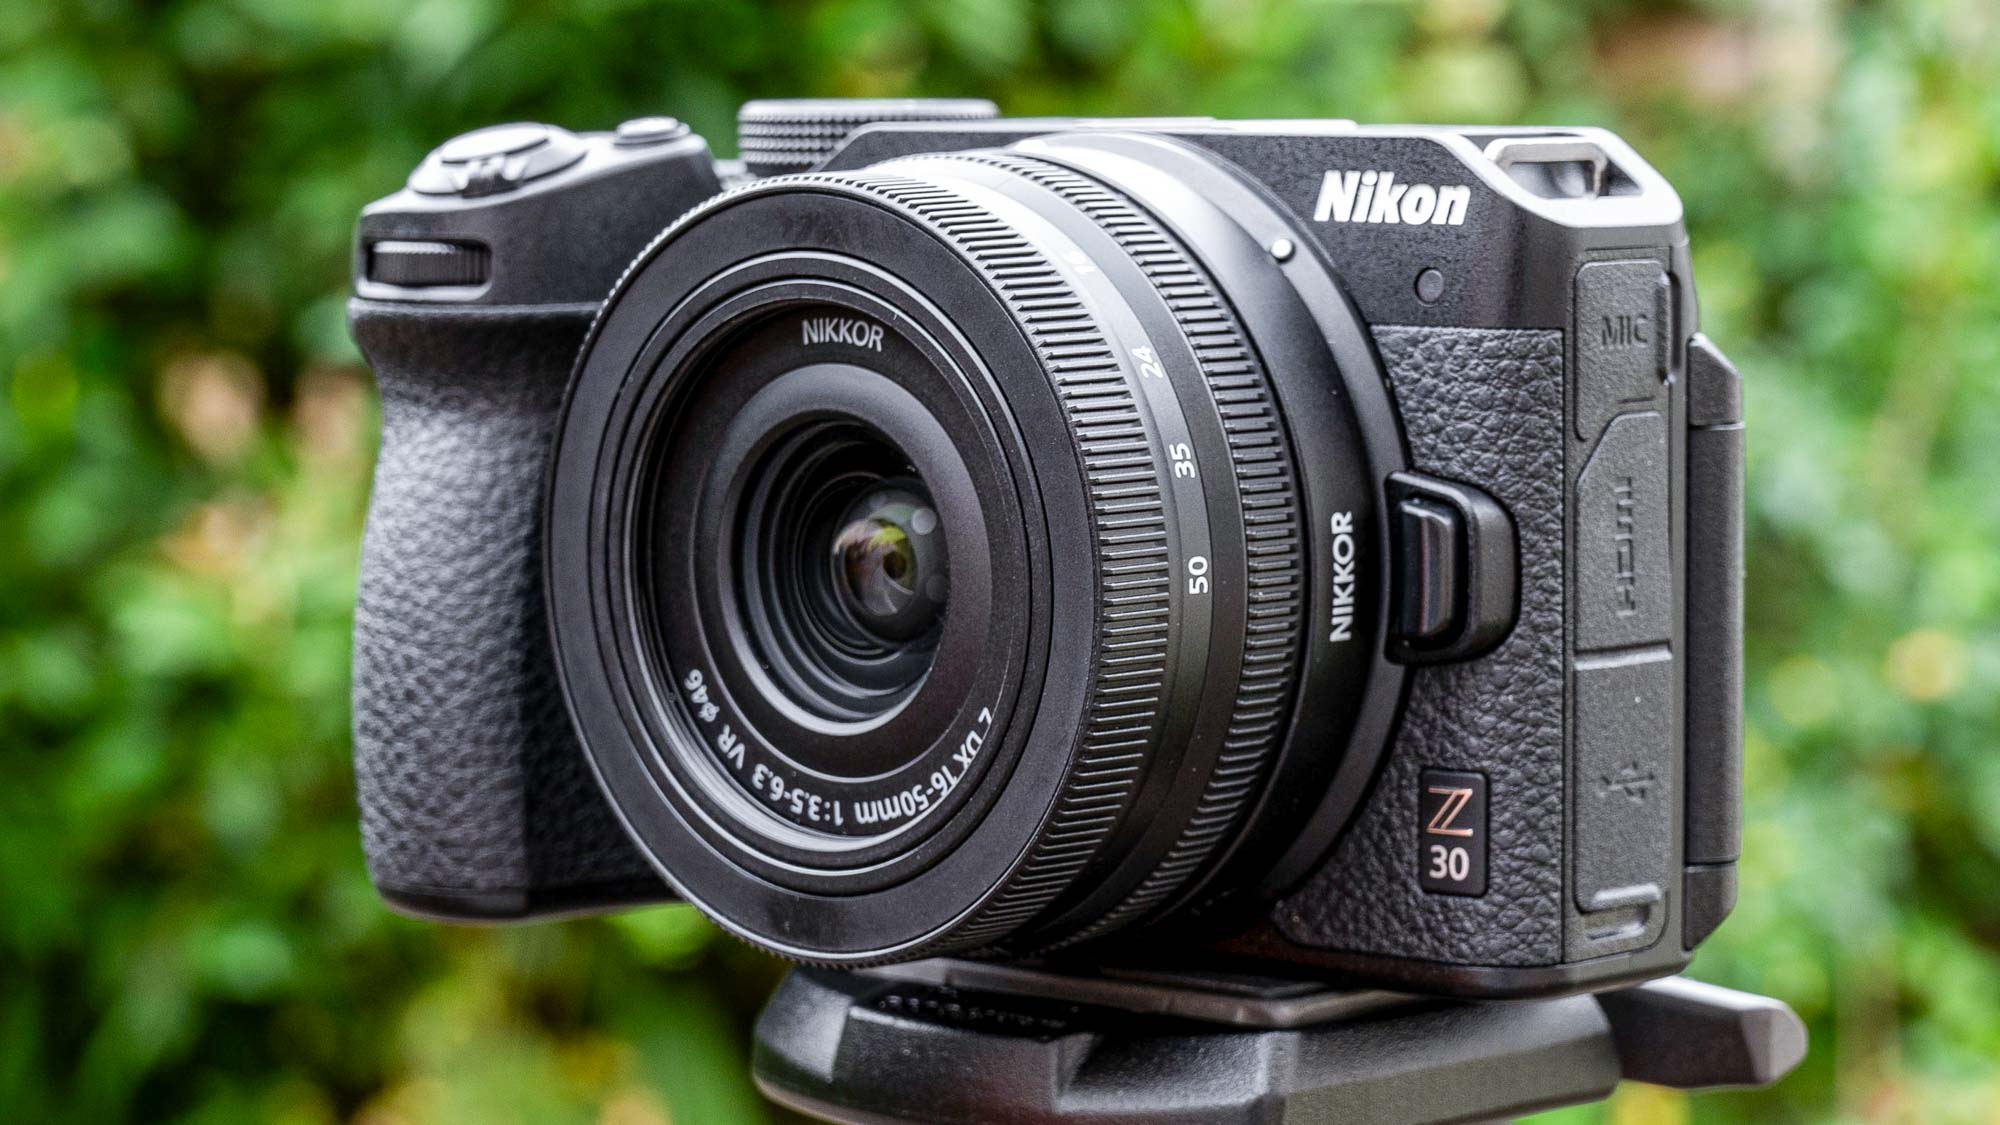 The Nikon Z30 May Be Announced Later This Month